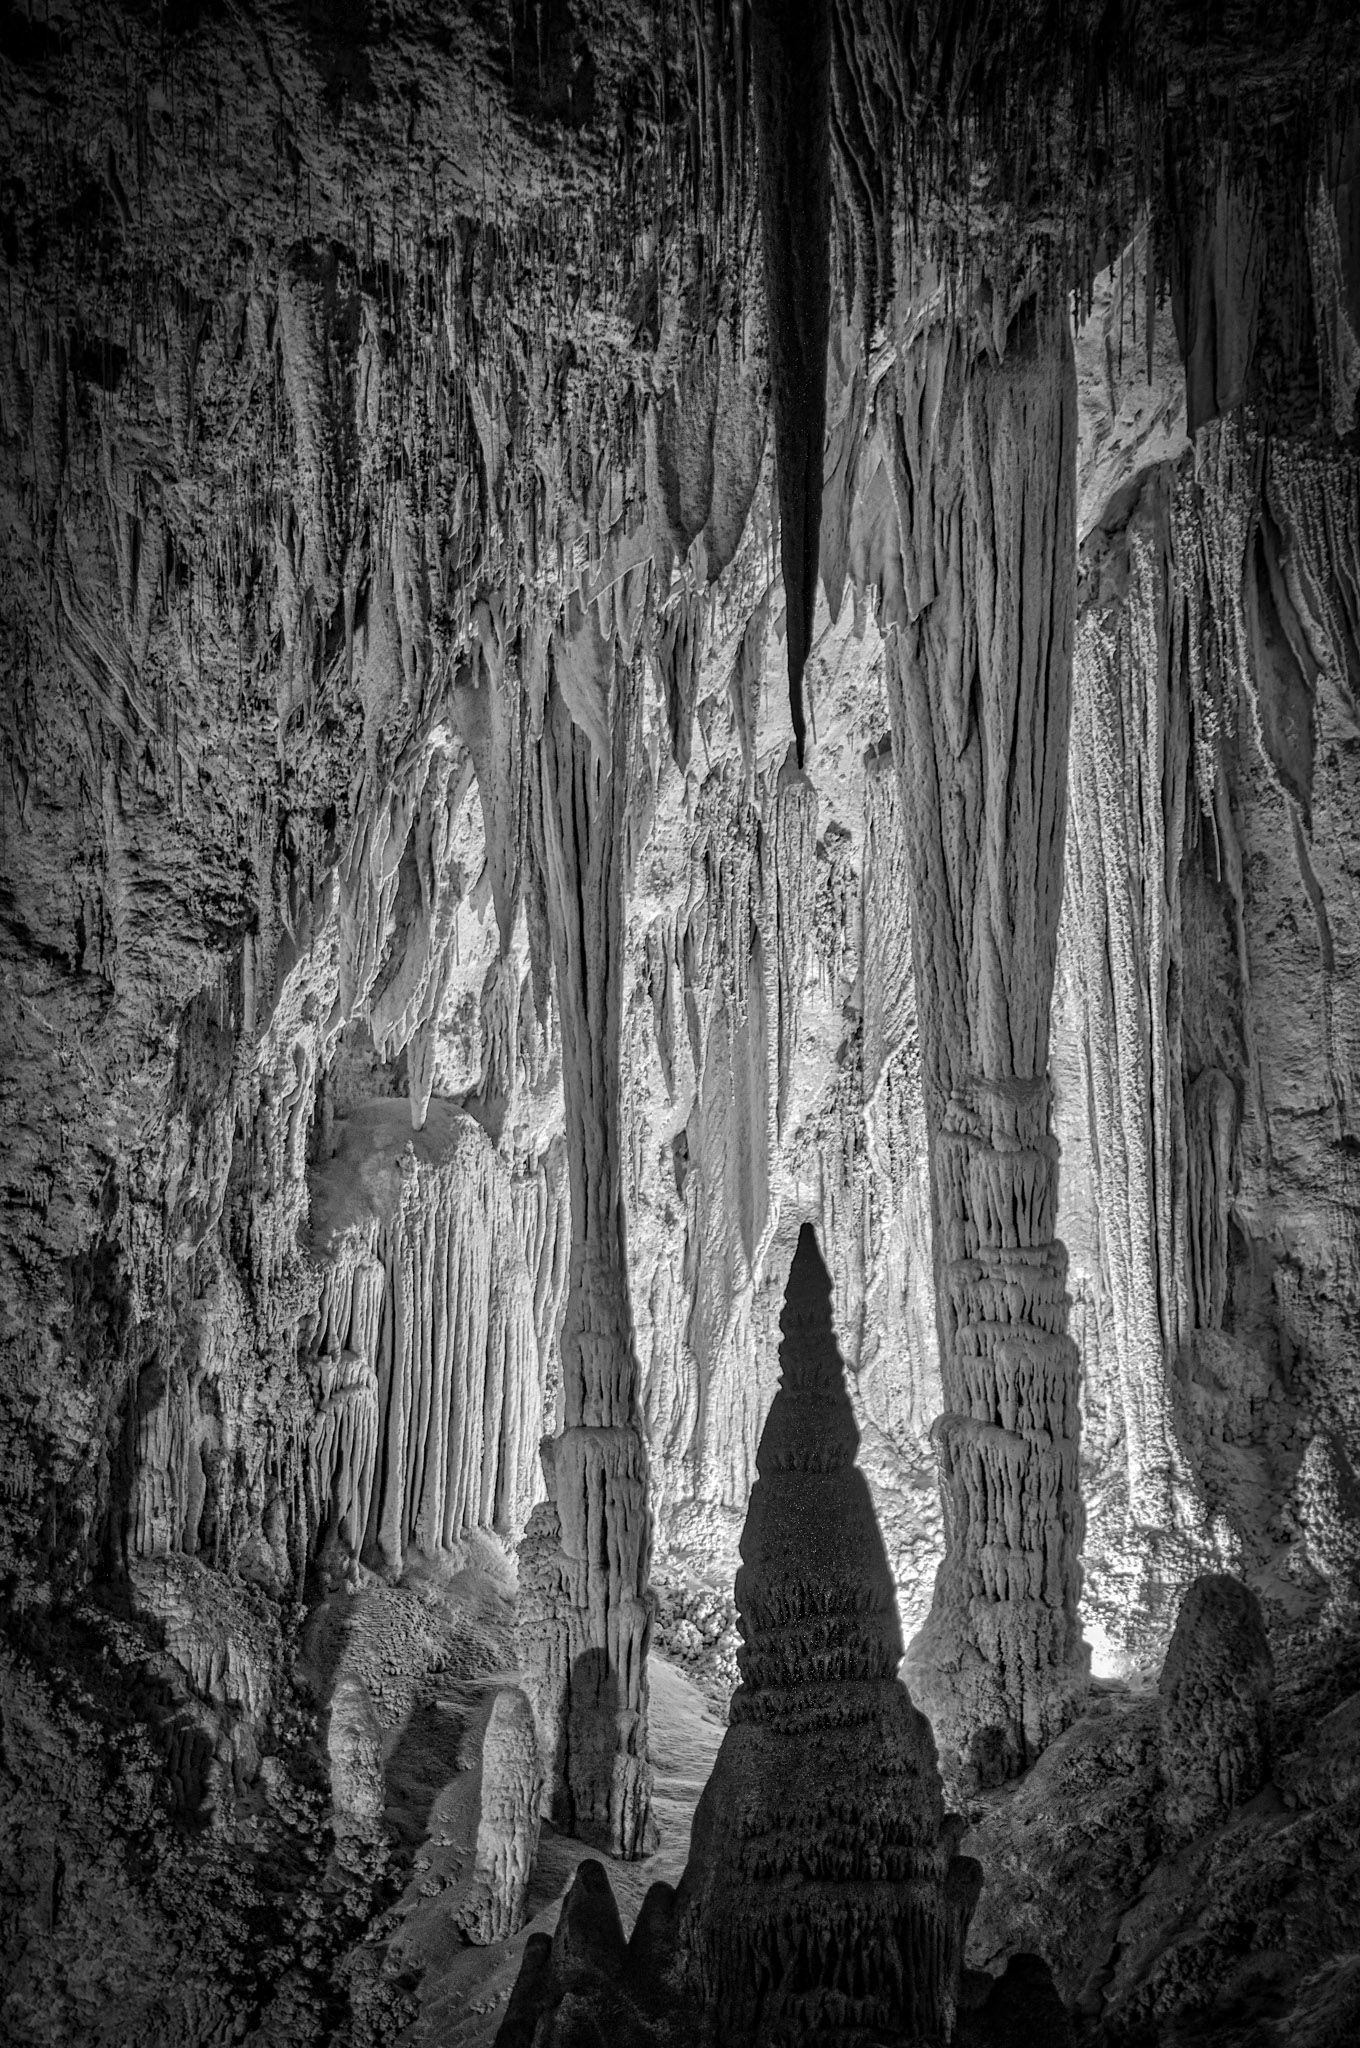 Stalactites, stalagmites, columns, drapery, and popcorn in an alcove in the Big Room area of Carlsbad Caverns National Park.